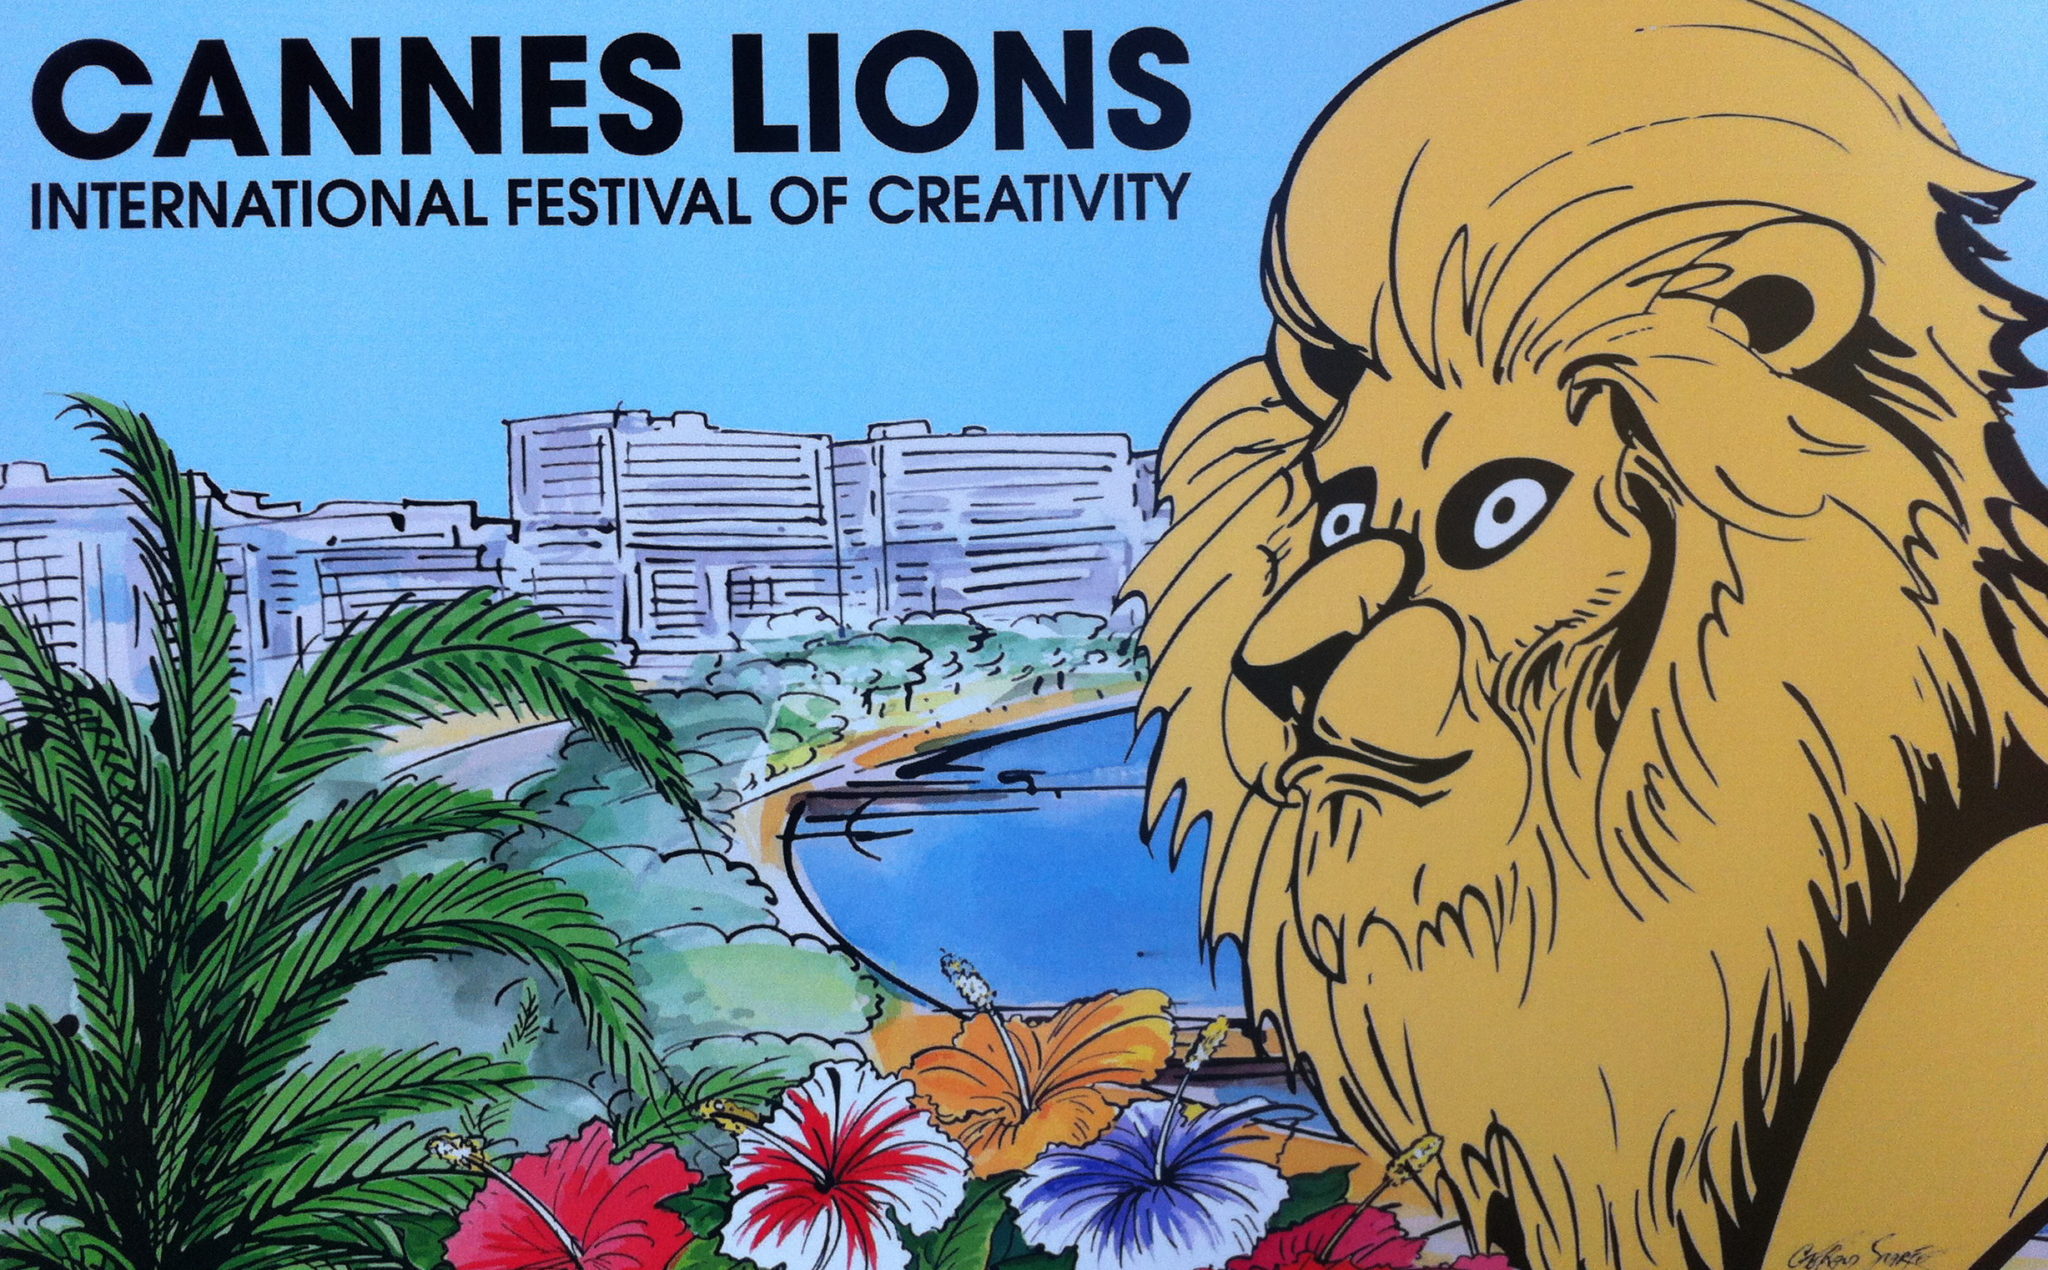 ​Branded Content, the Cannes Lions Festival, and the Search for Human Connection